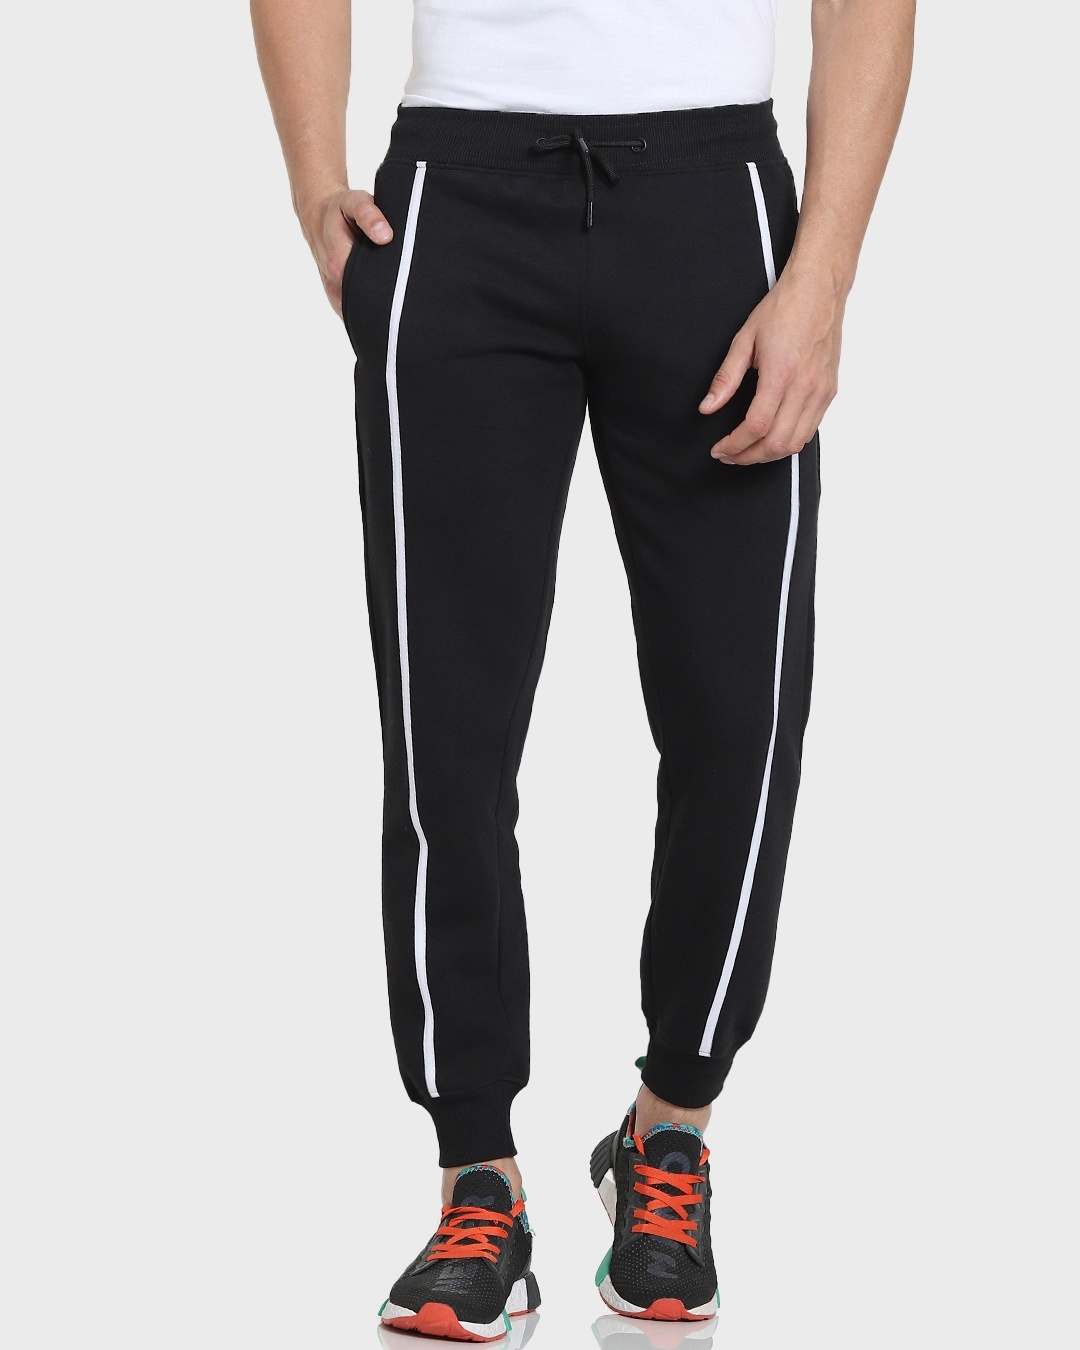 Shop Black Solid Joggers AW 21-Front